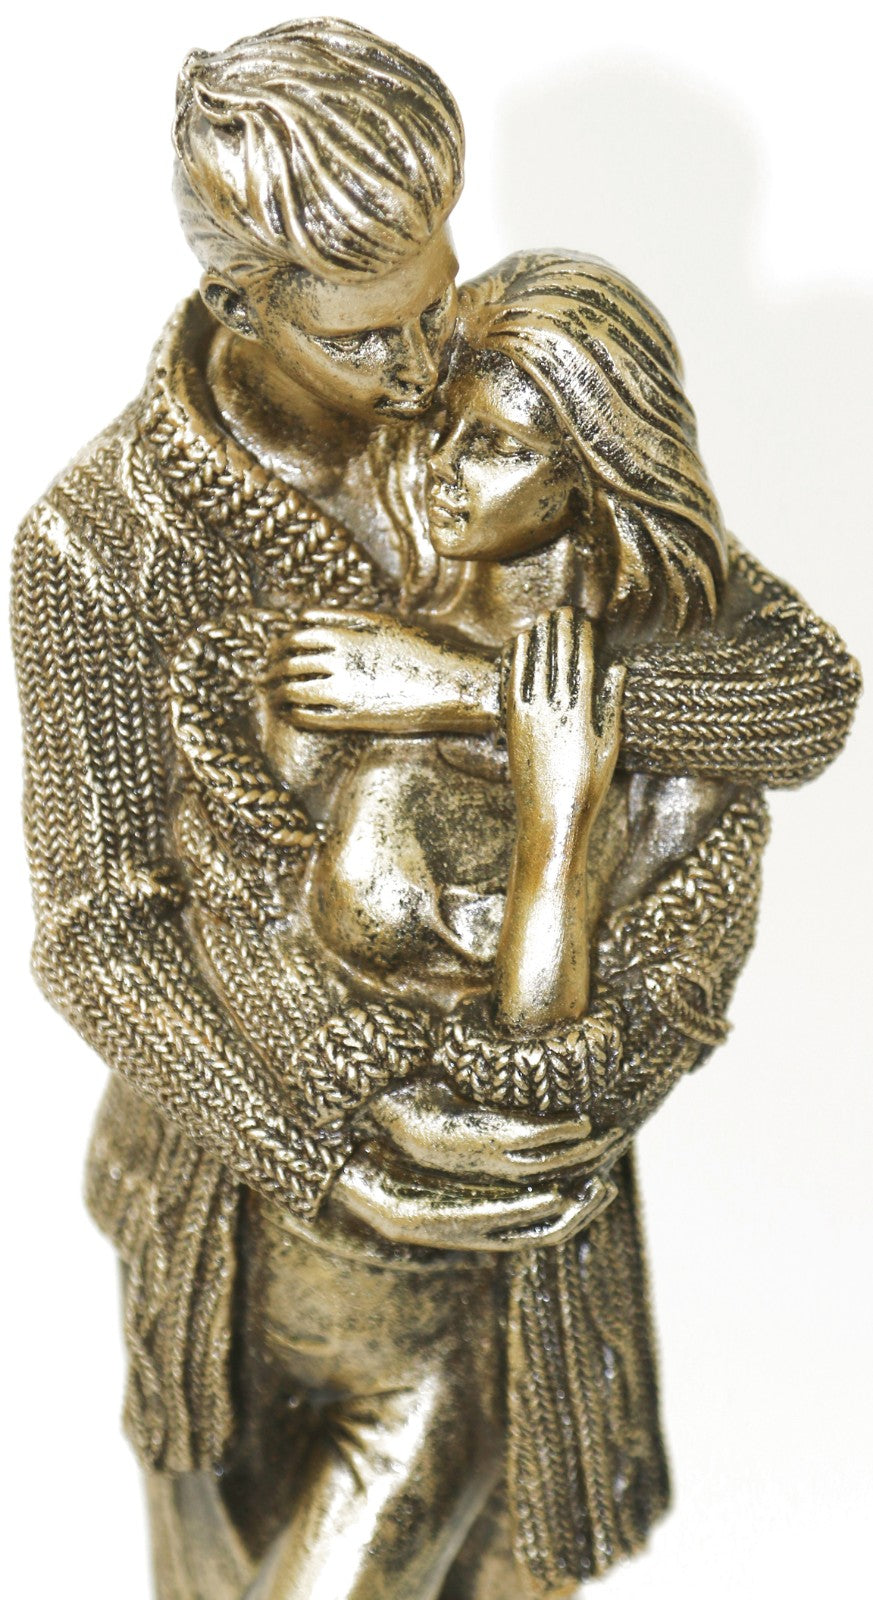 Hand Made Detailed Man and Woman Hugging Each Other Handcrafted Sculpture Statue